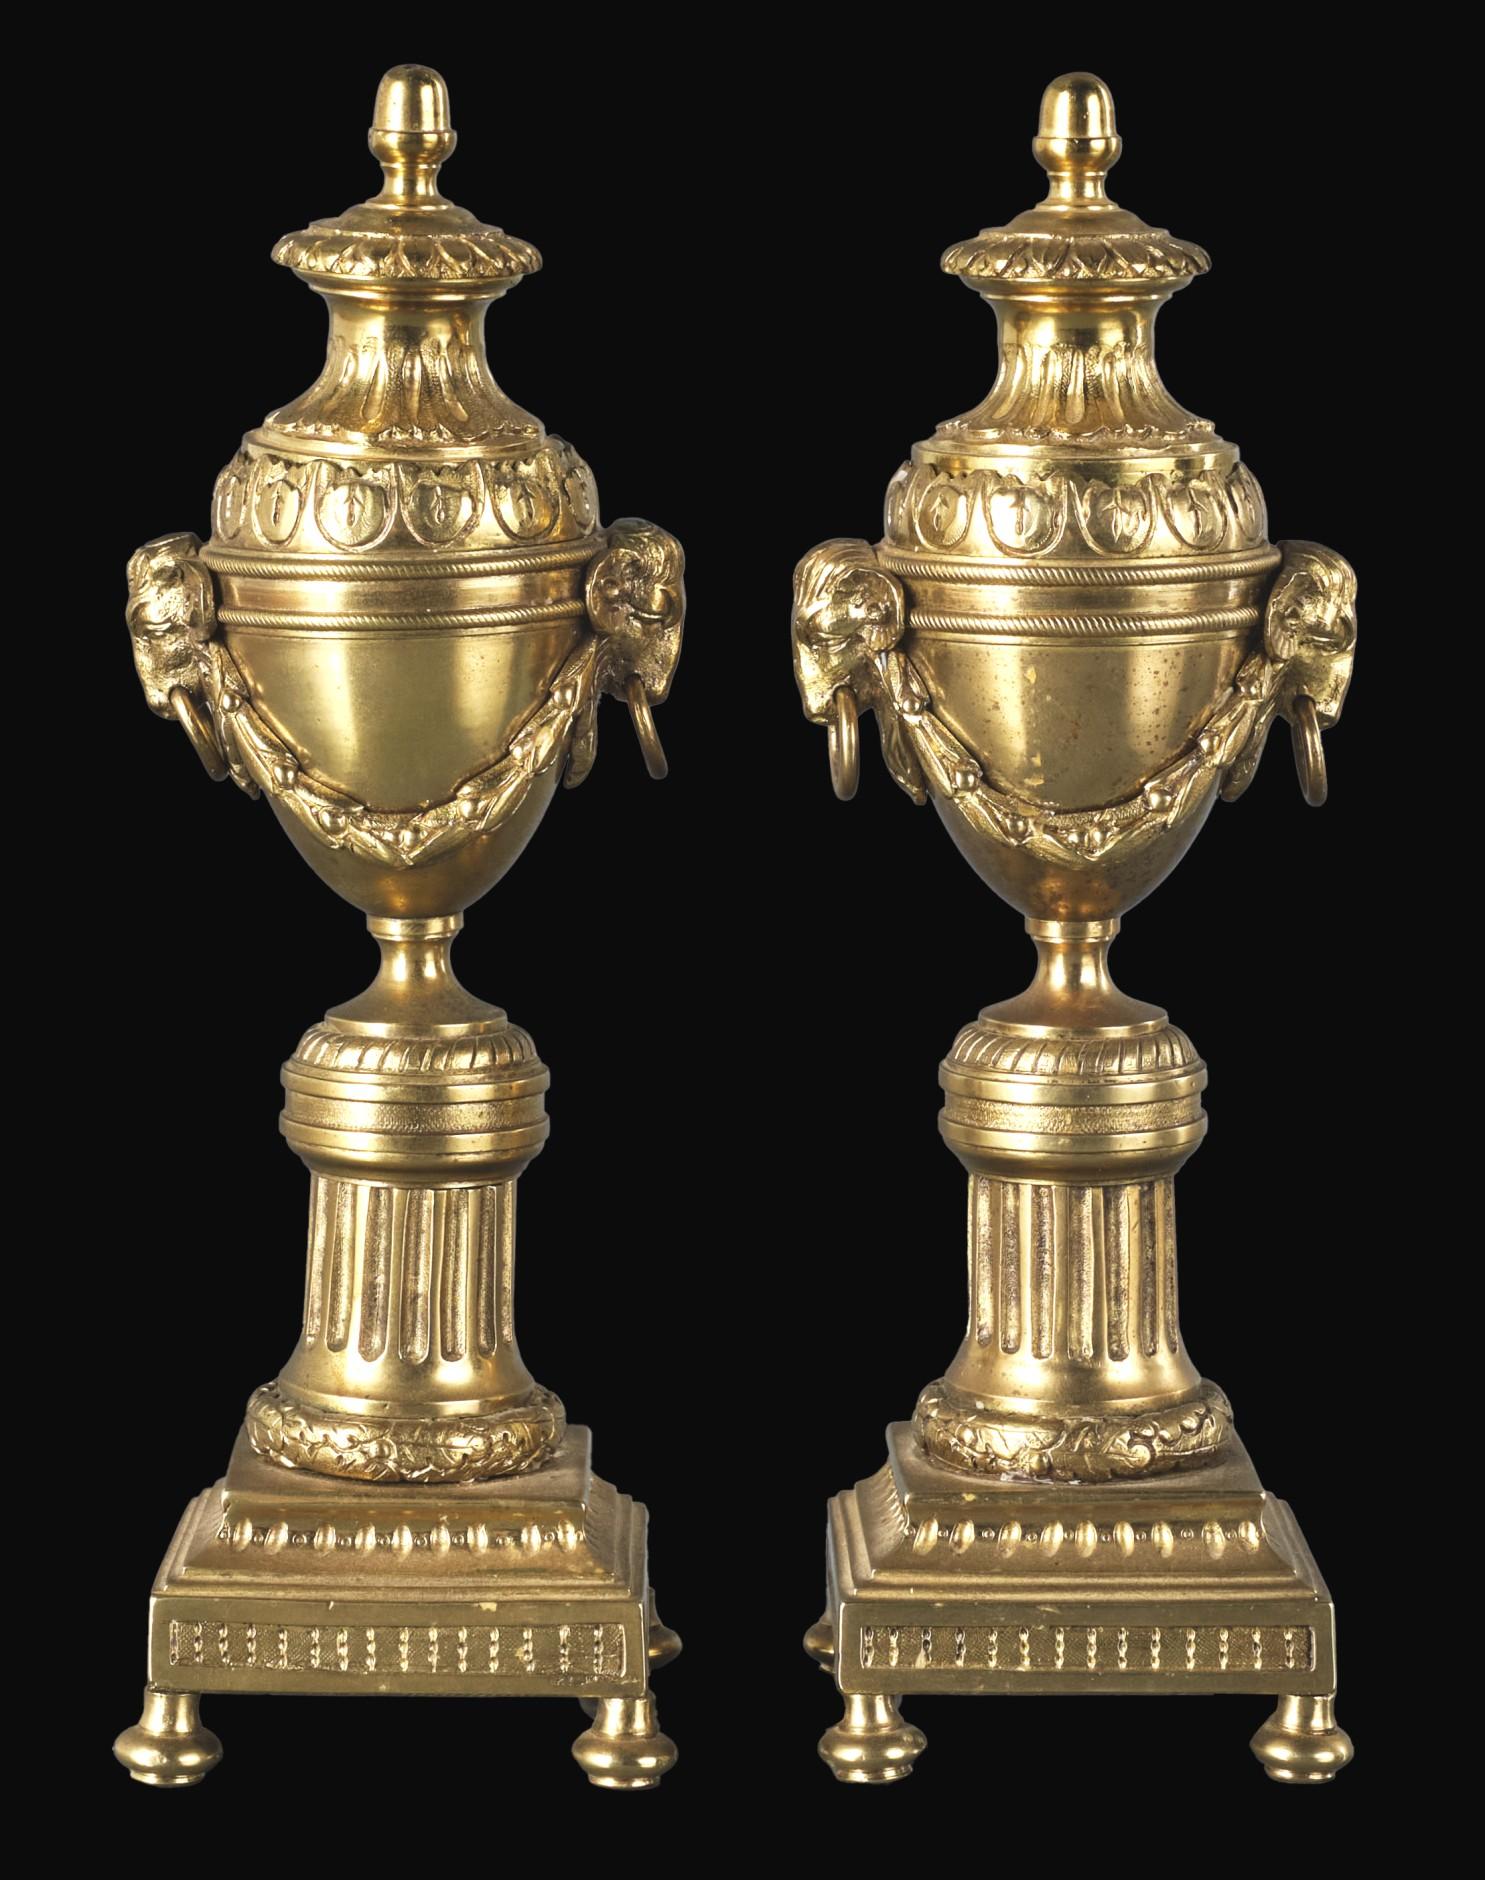 A very fine pair of Neoclassical Revival gilt bronze cassolettes / candlesticks after a design by Matthew Boulton (1728-1809). 
Both finely cast & richly gilded amphora shaped bodies decorated with neoclassical elements of ram’s heads & bellflower